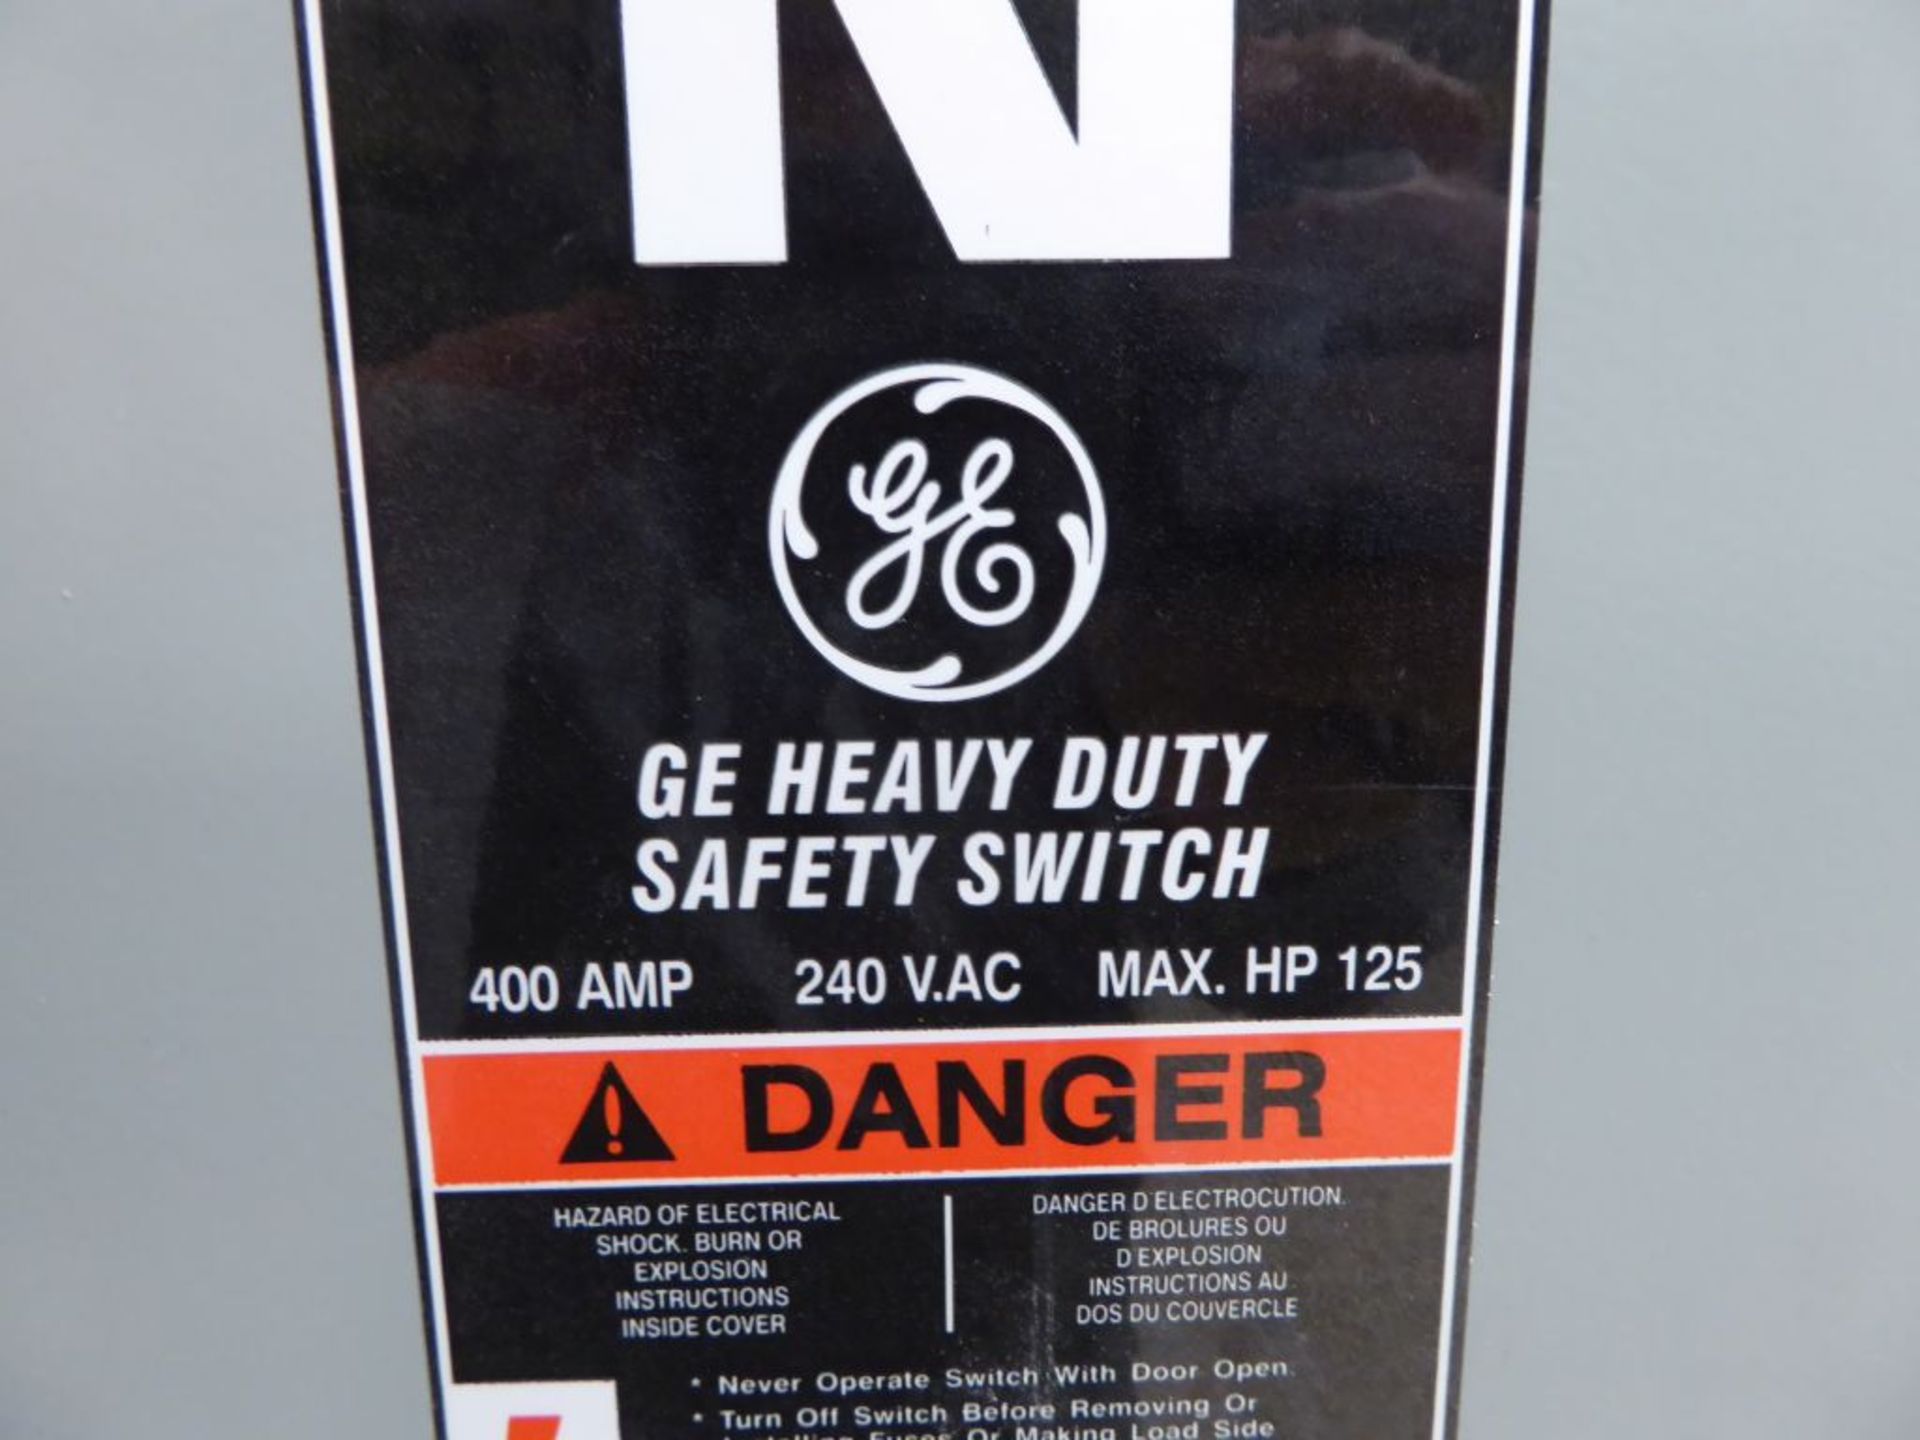 Spartanburg, SC - GE Heavy Duty Safety Switch - Image 3 of 3